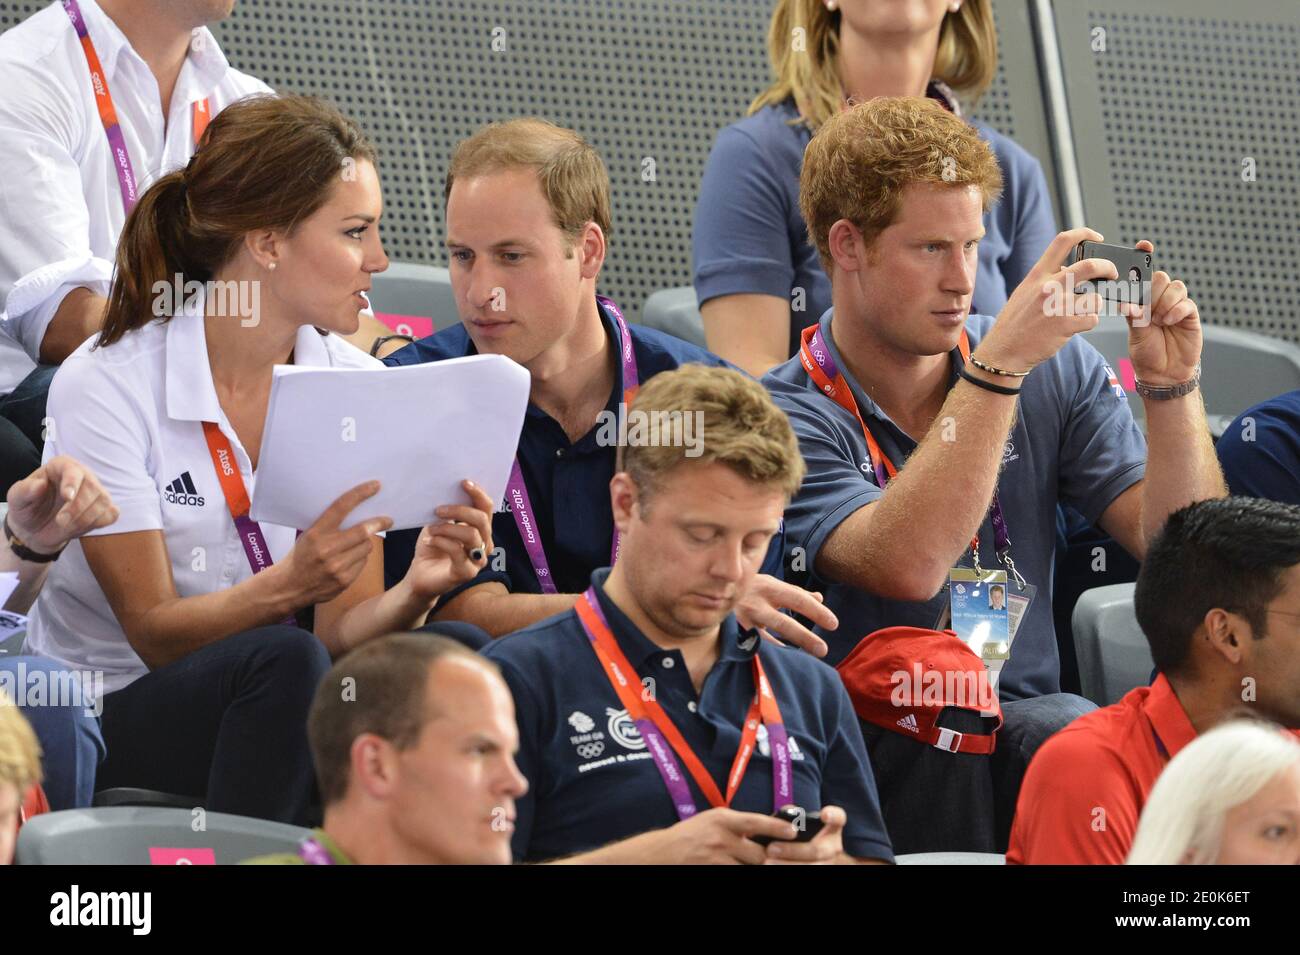 The Duke William, Duchess Catherine of Cambridge and Prince Harry attend the Cycling during day six of the Olympic Games at the Velodrome in London, UK on August 2, 2012. Photo by Gouhier-Guibbaud-JMP/ABACAPRESS.COM Stock Photo